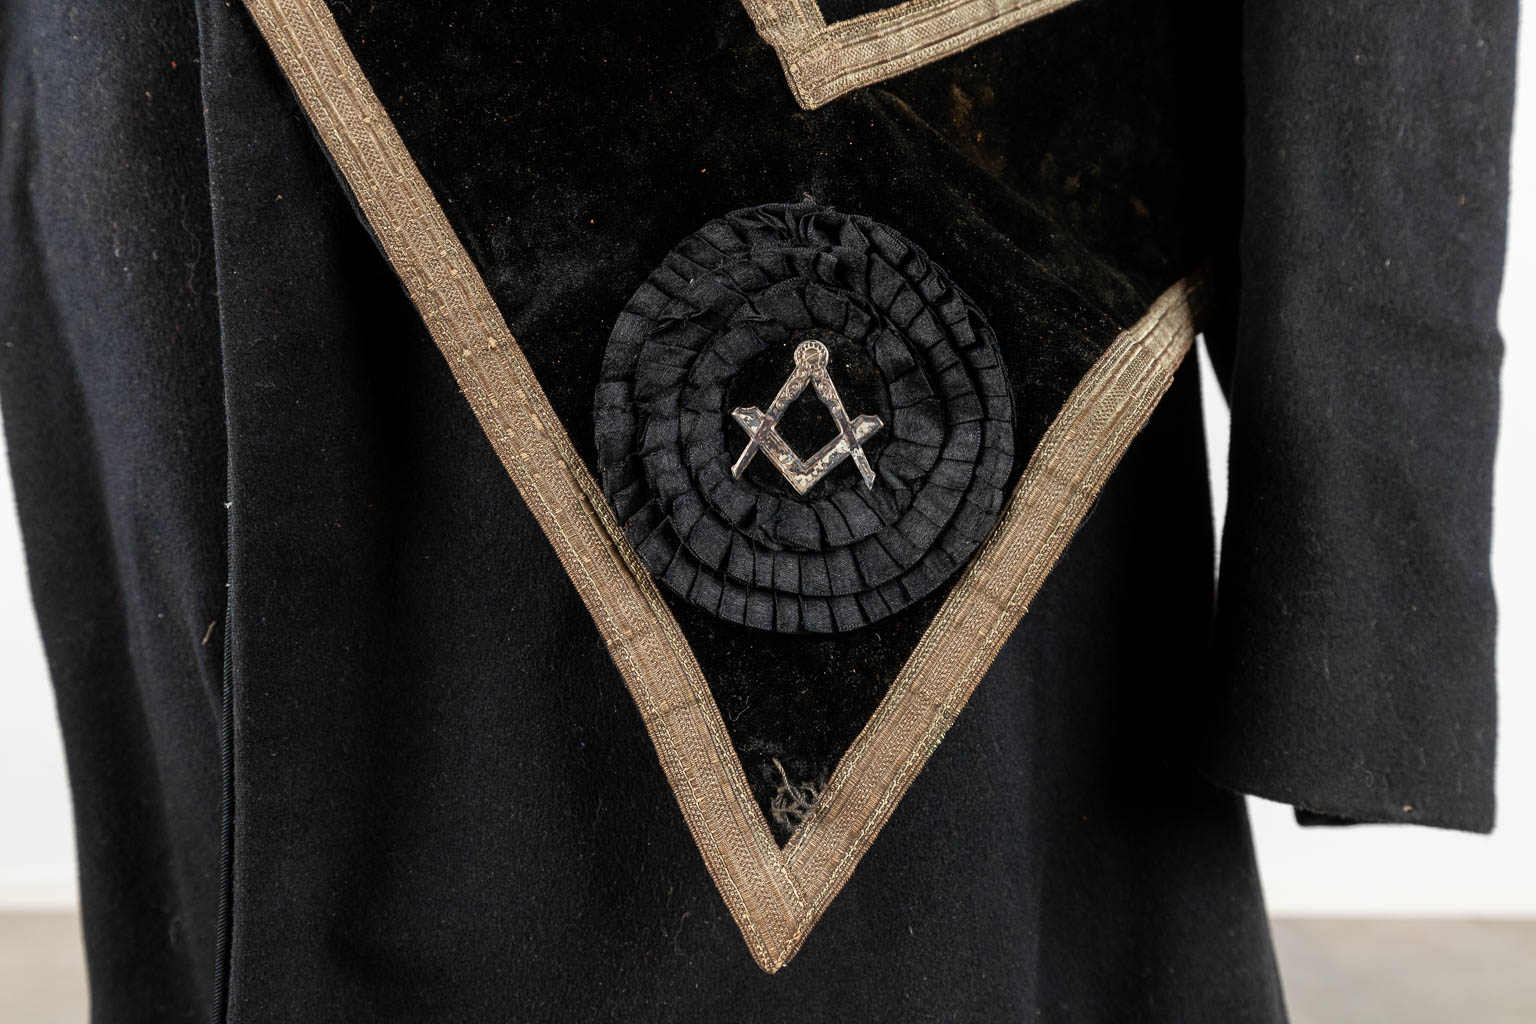 A set of Ceremonial clothing, Freemasonry or Framaconnerie. 